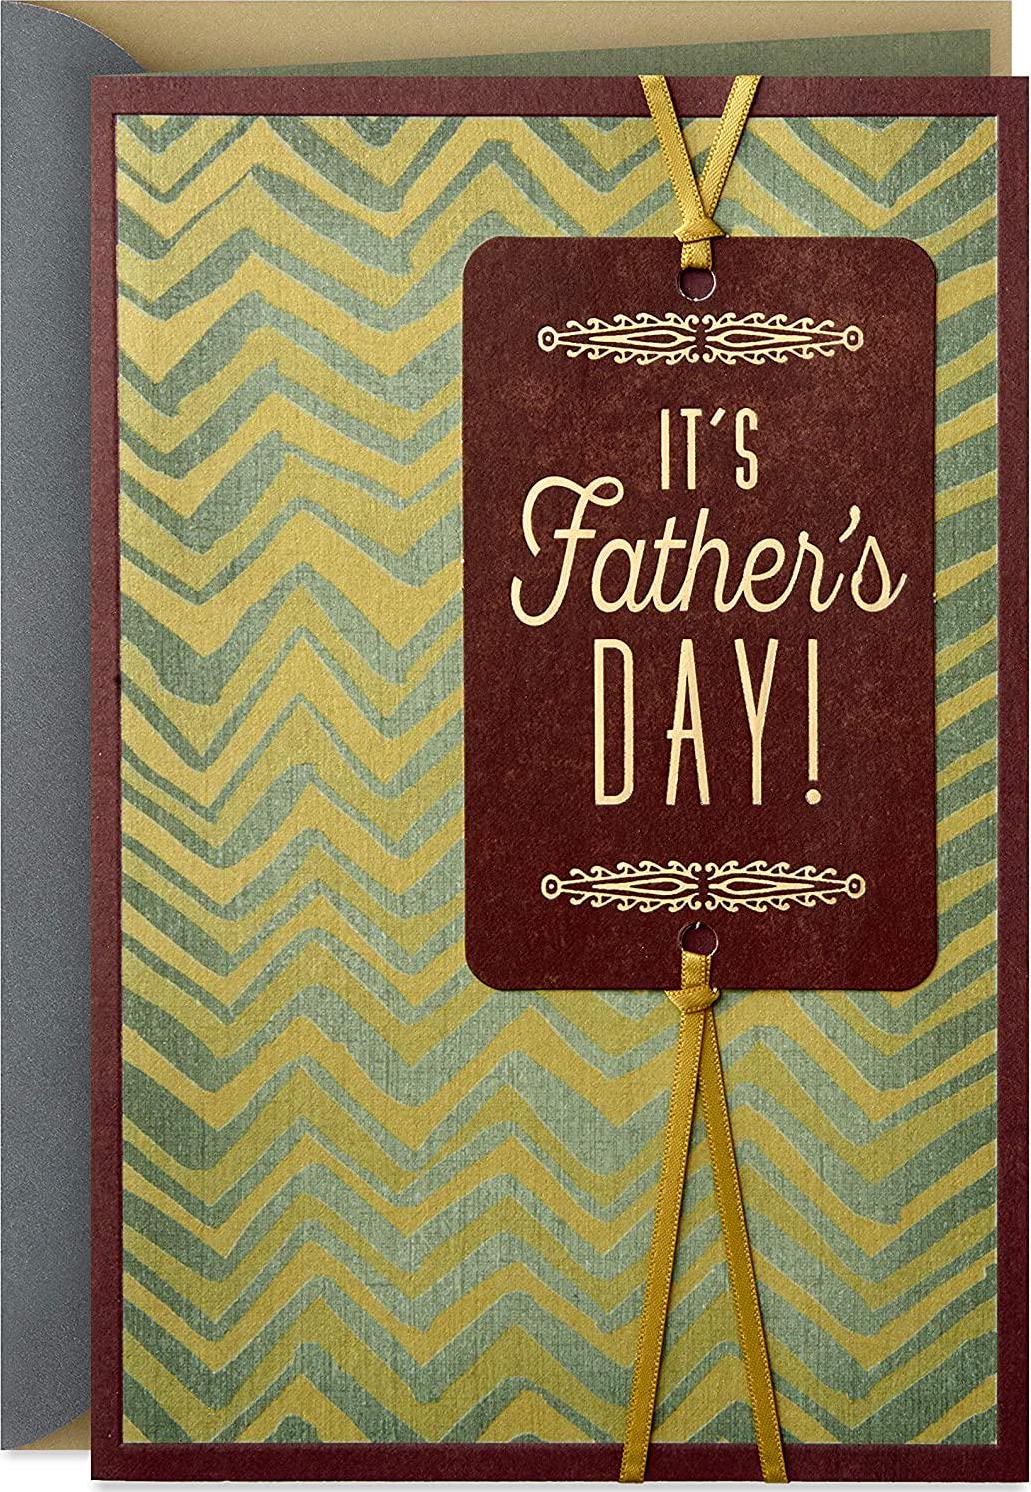 Hallmark, Hallmark It's Father's Day Father's Day Greeting Card